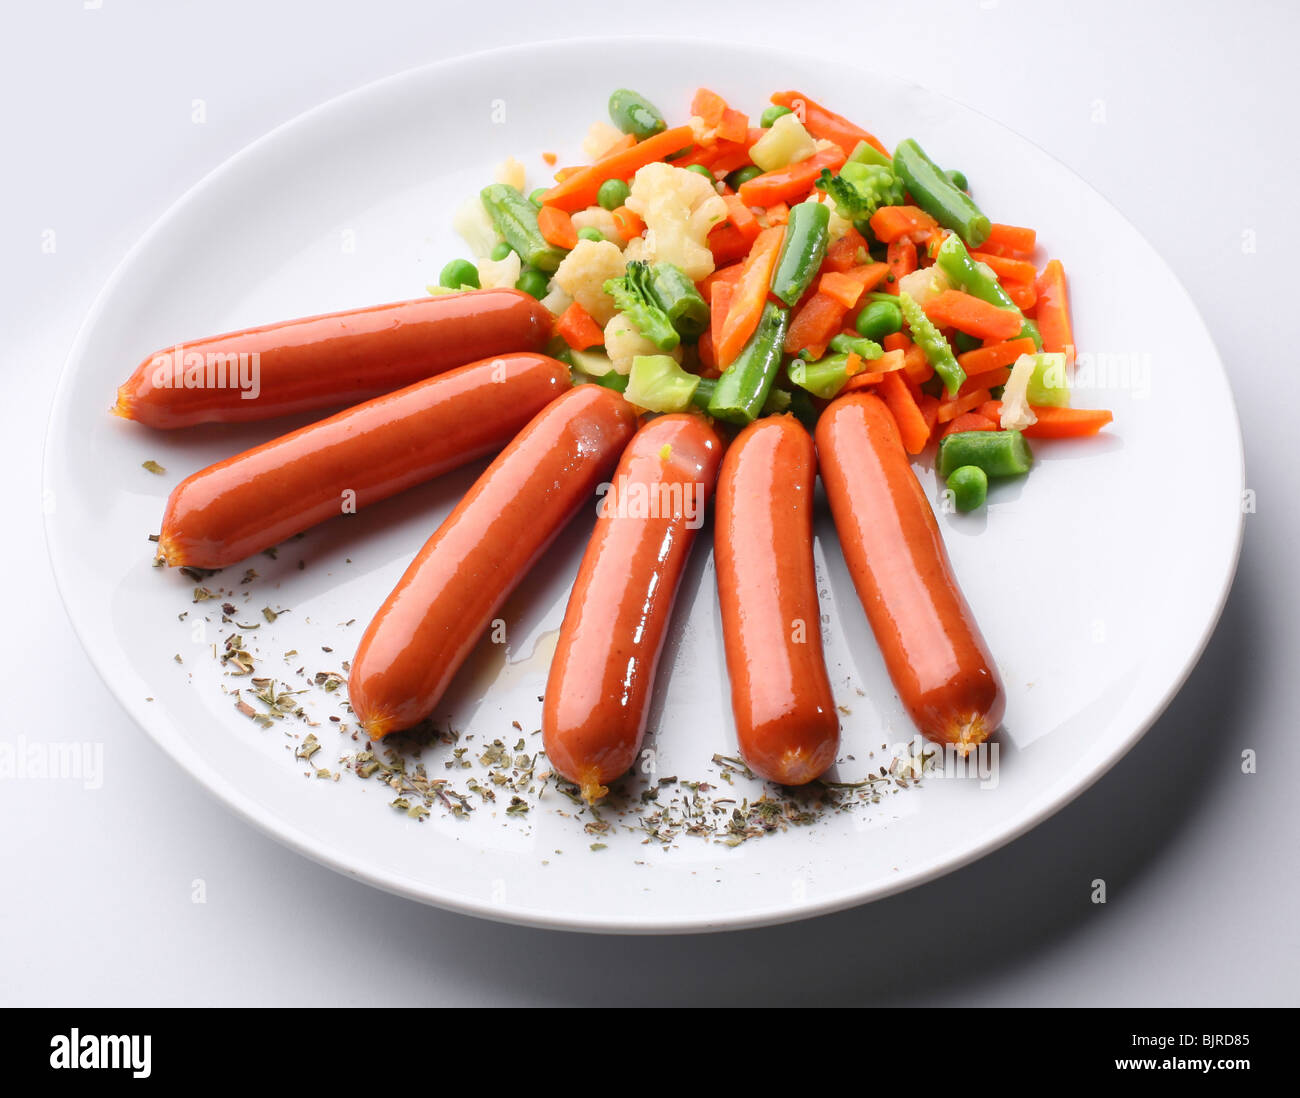 Sausages with boiled vegetables Stock Photo